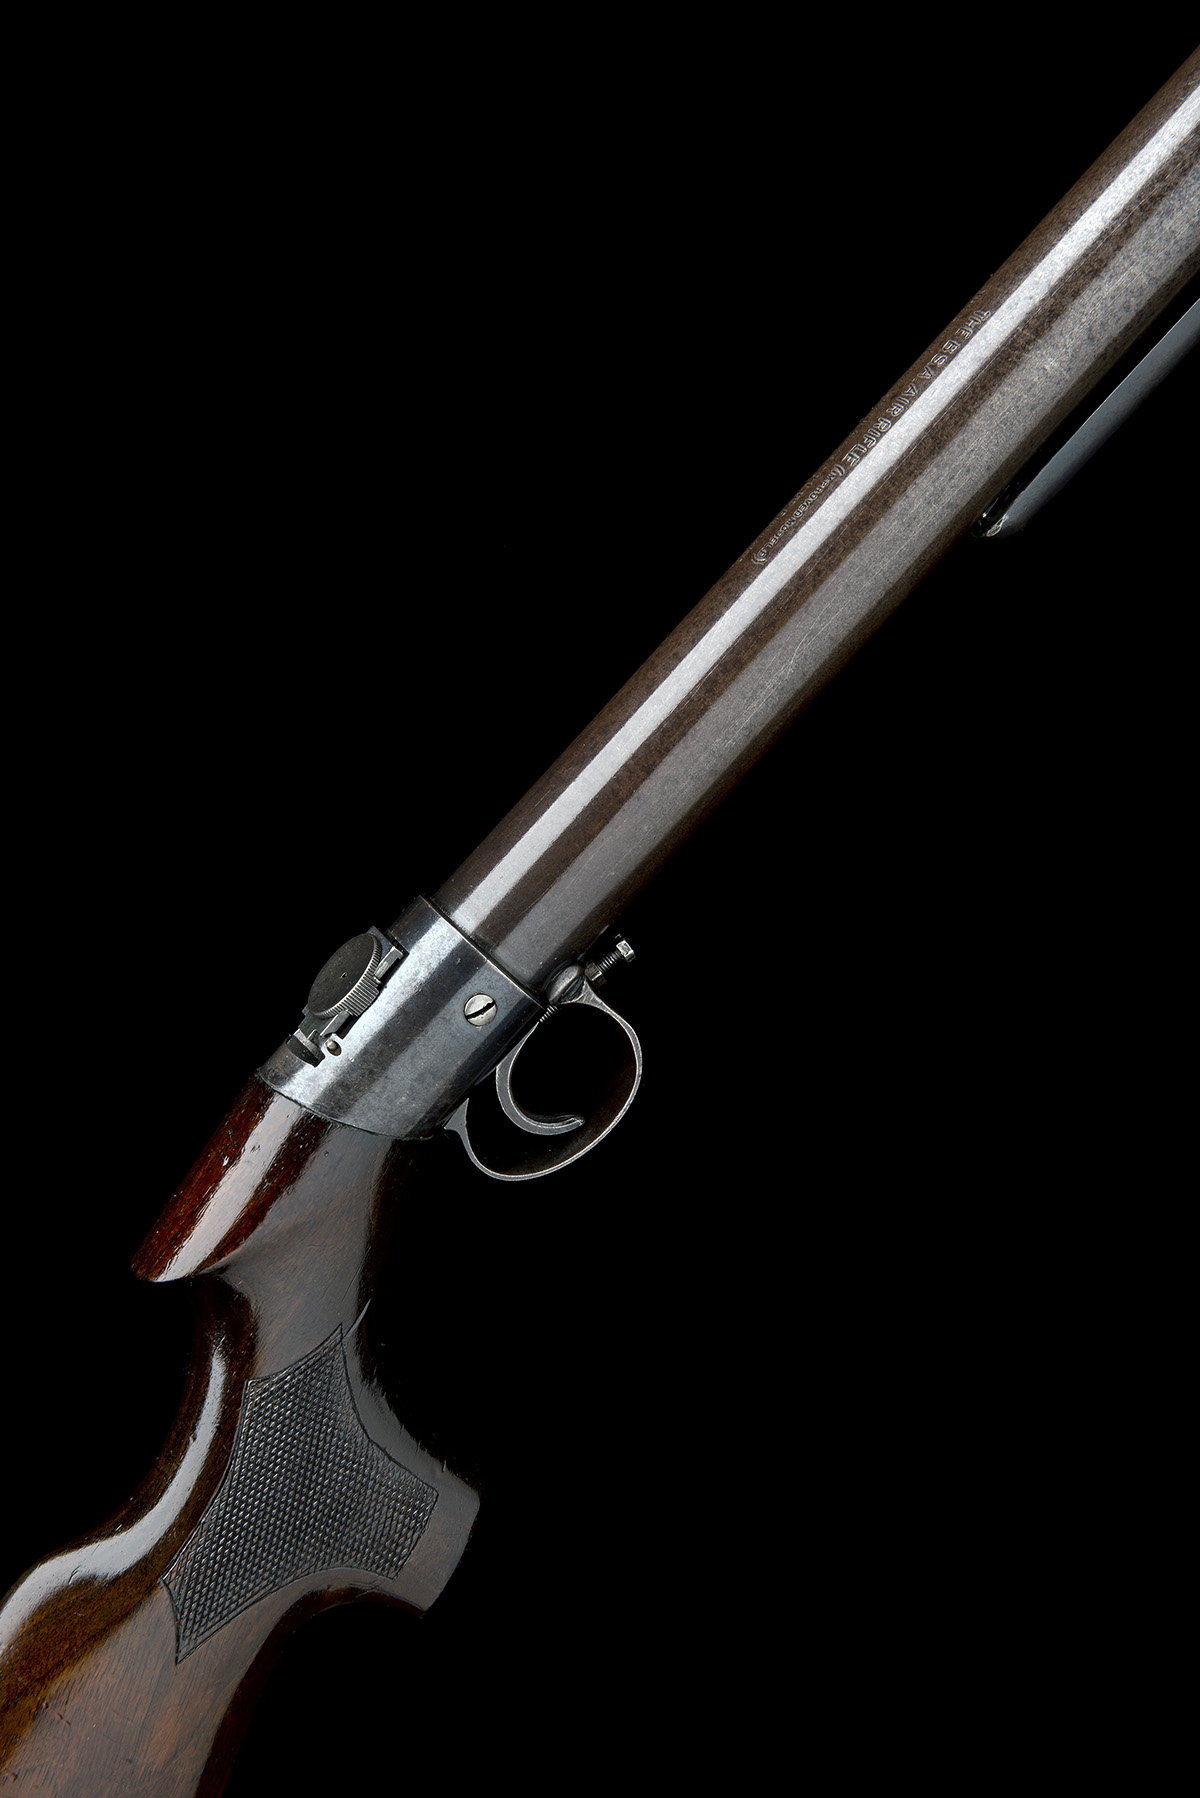 BSA, BIRMINGHAM A .22 UNDER-LEVER AIR-RIFLE, MODEL 'IMPROVED MODEL 'D' WITH FACTORY PEEP-SIGHT',